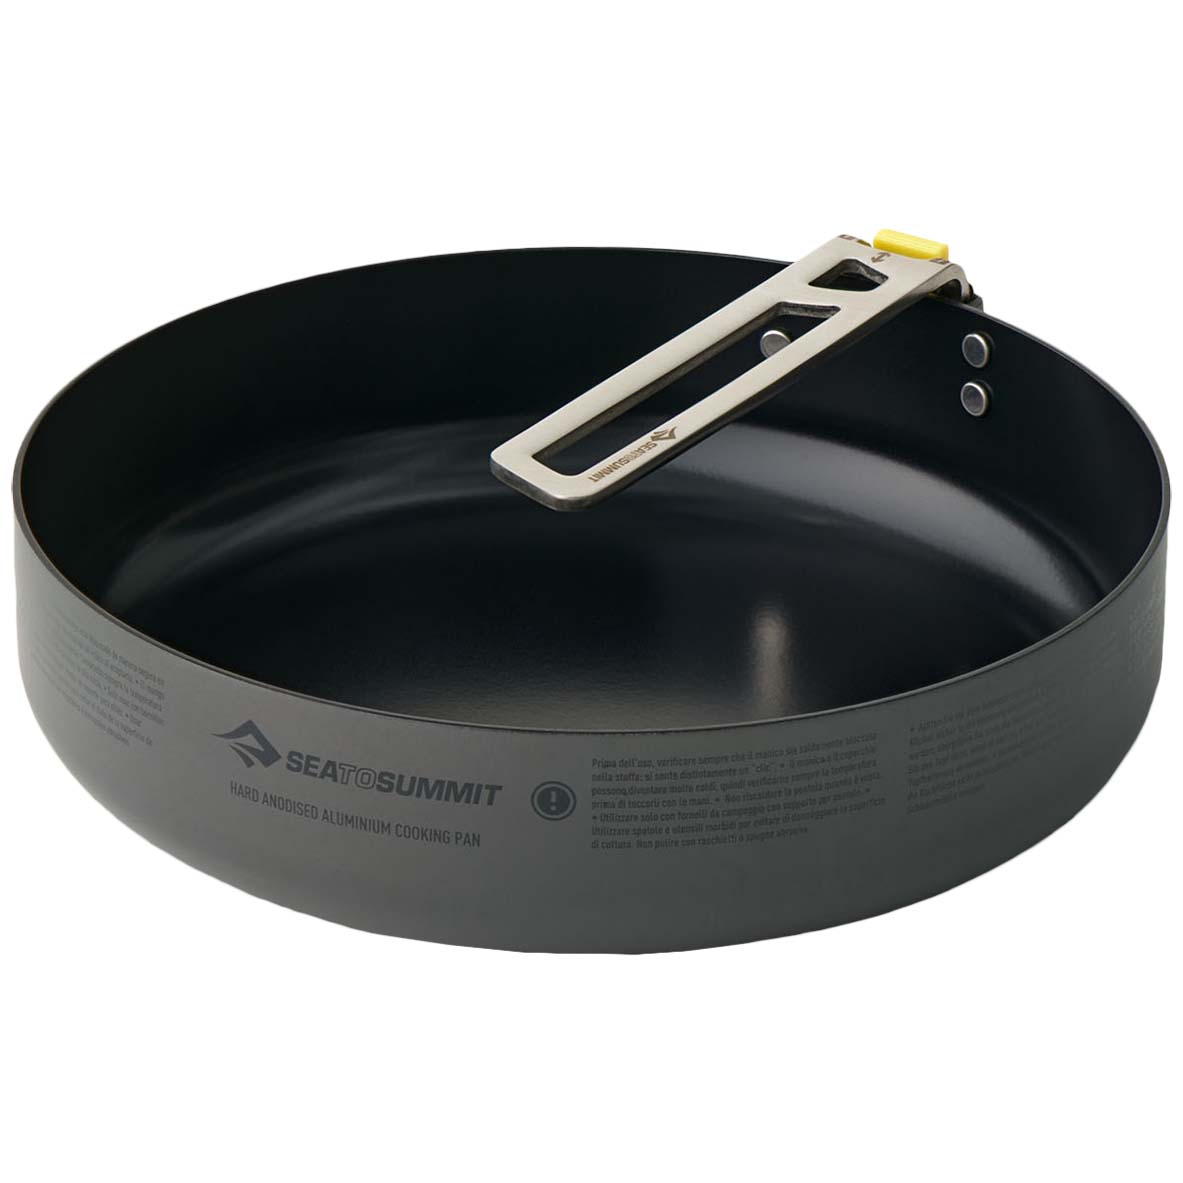 Sea to Summit Frontier 8" Ultralight Camping Frying Pan